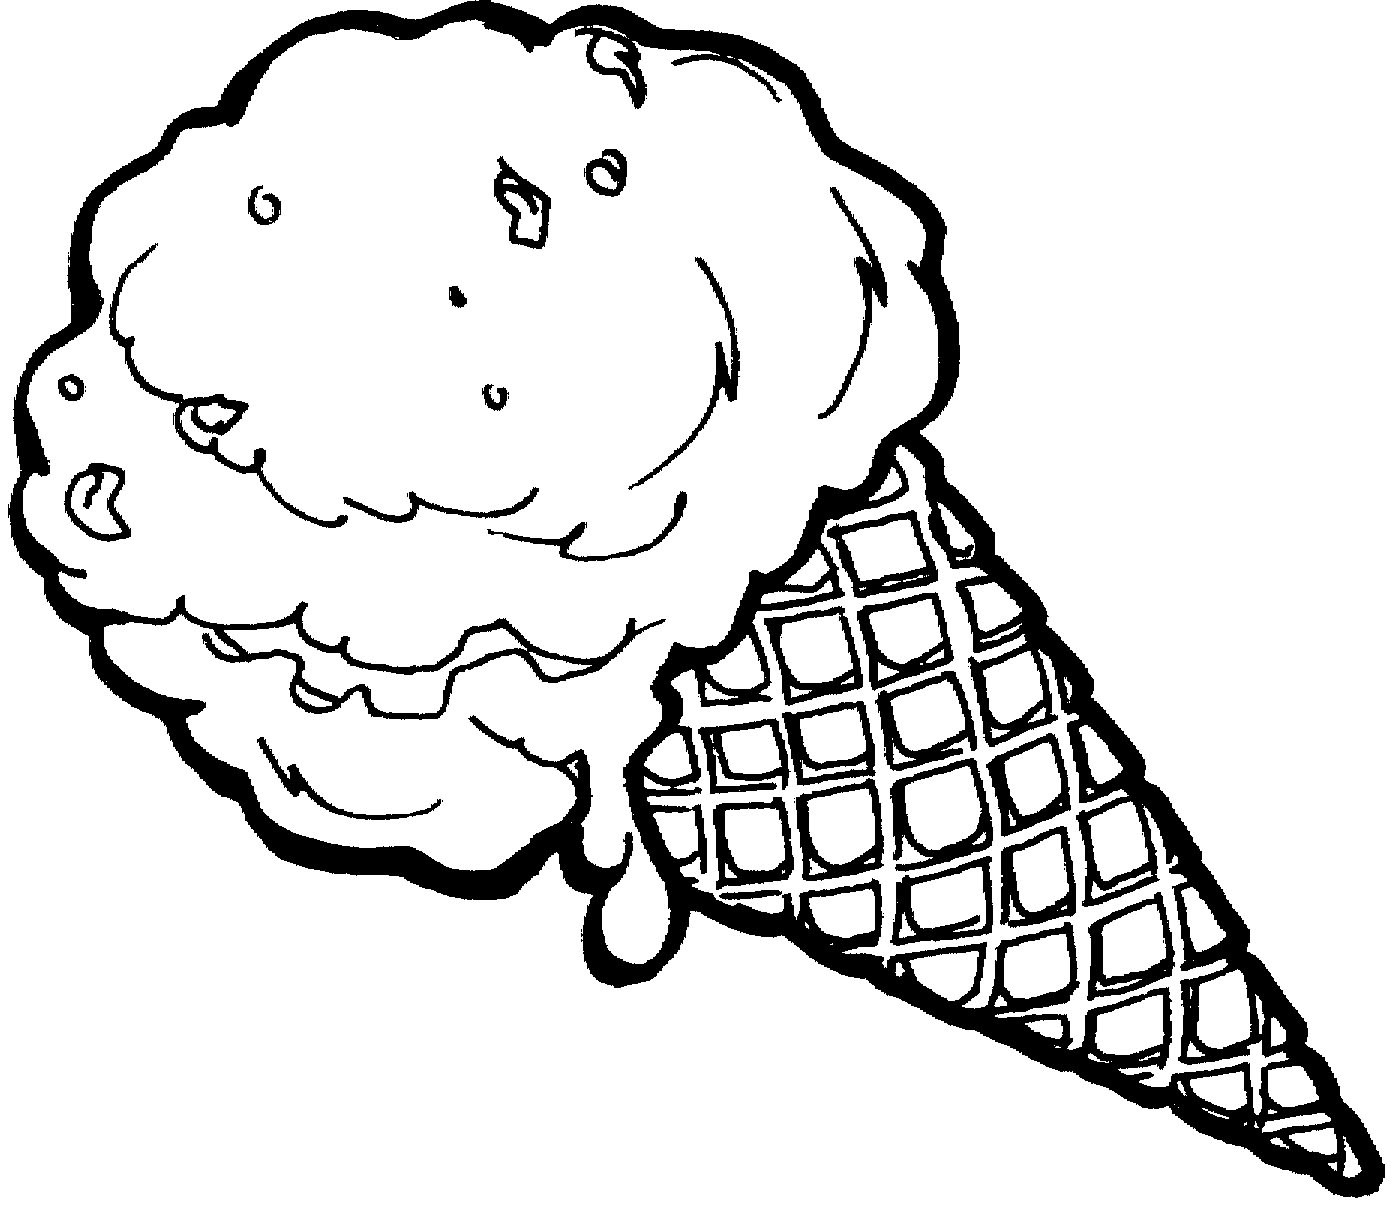 Coloring Pages For Kids Ice Cream
 Ice Cream Coloring Pages